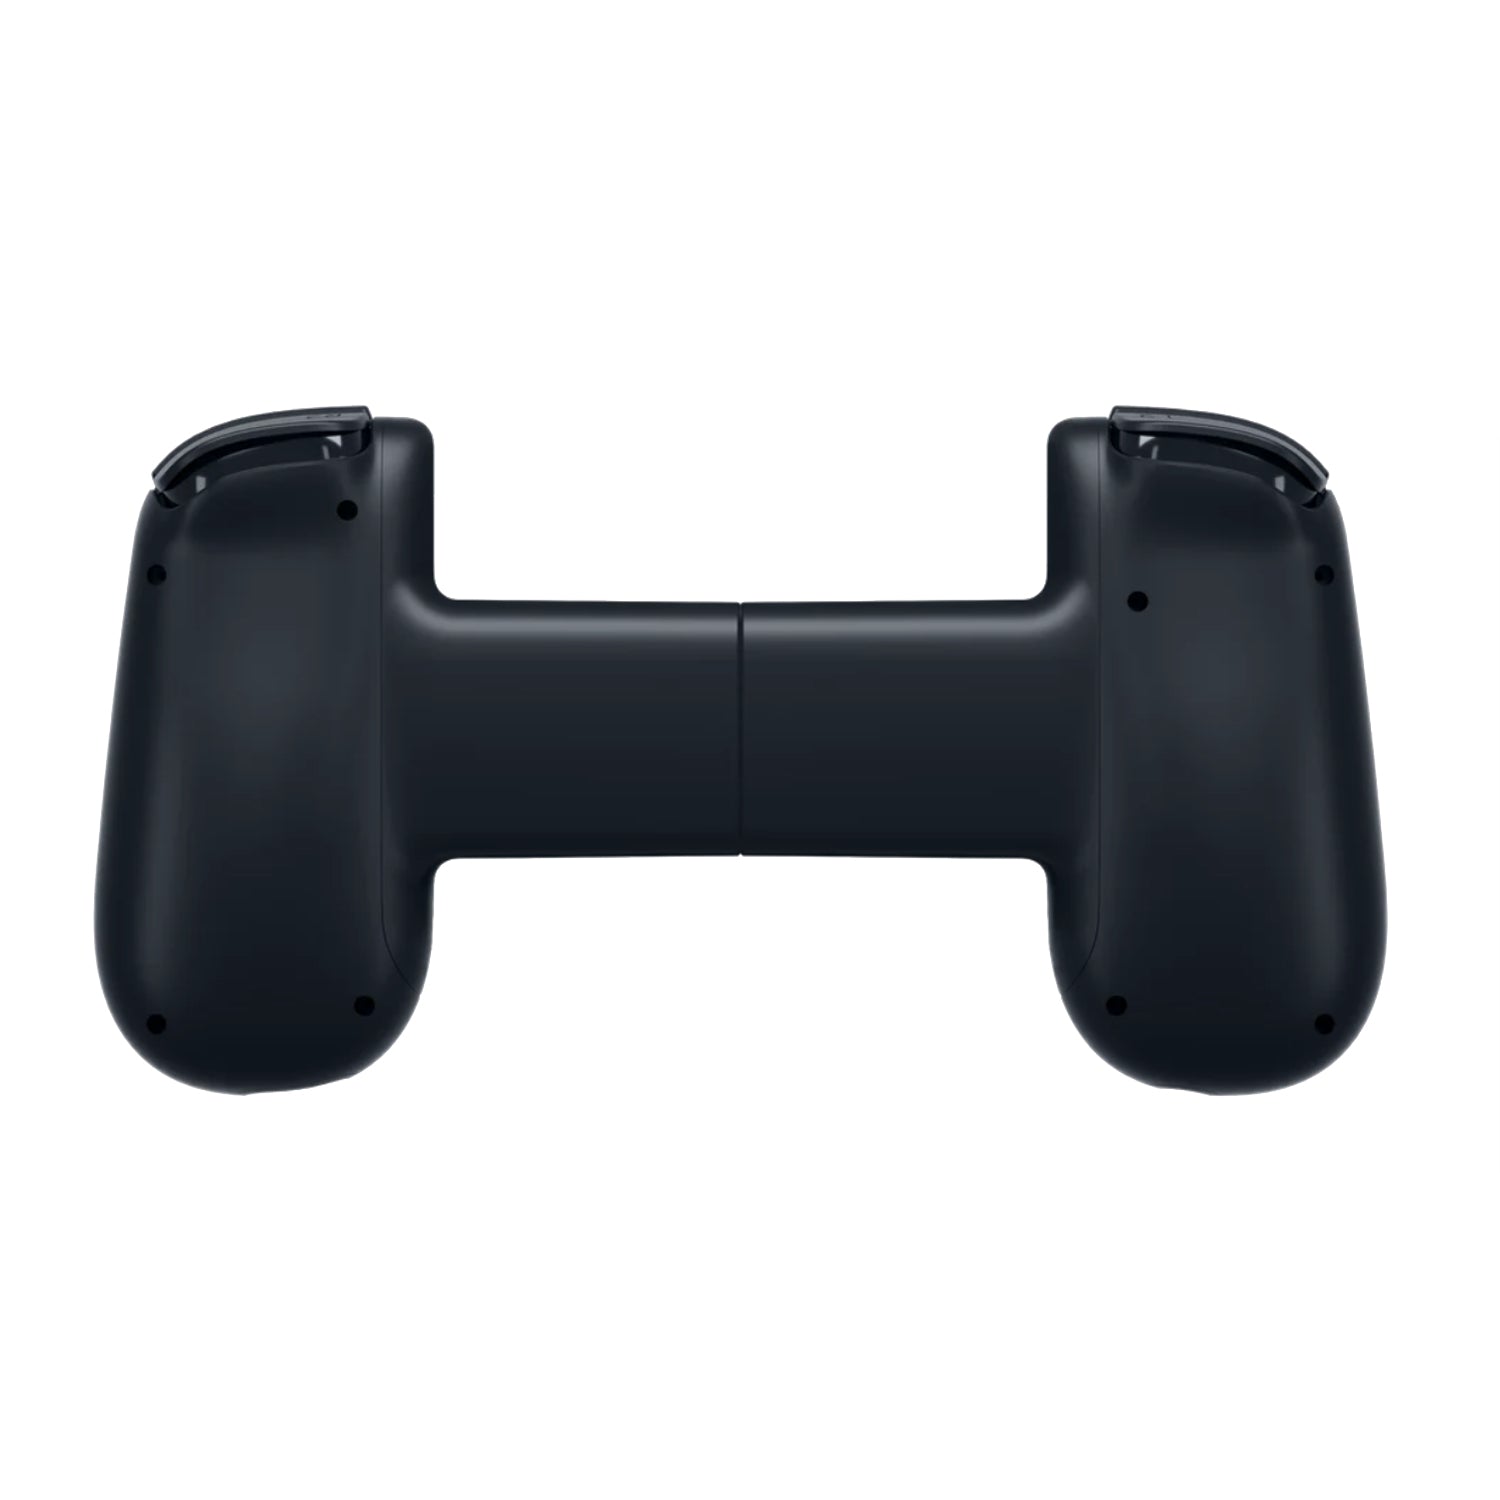 Backbone One Controller V2 for iPhone / Android